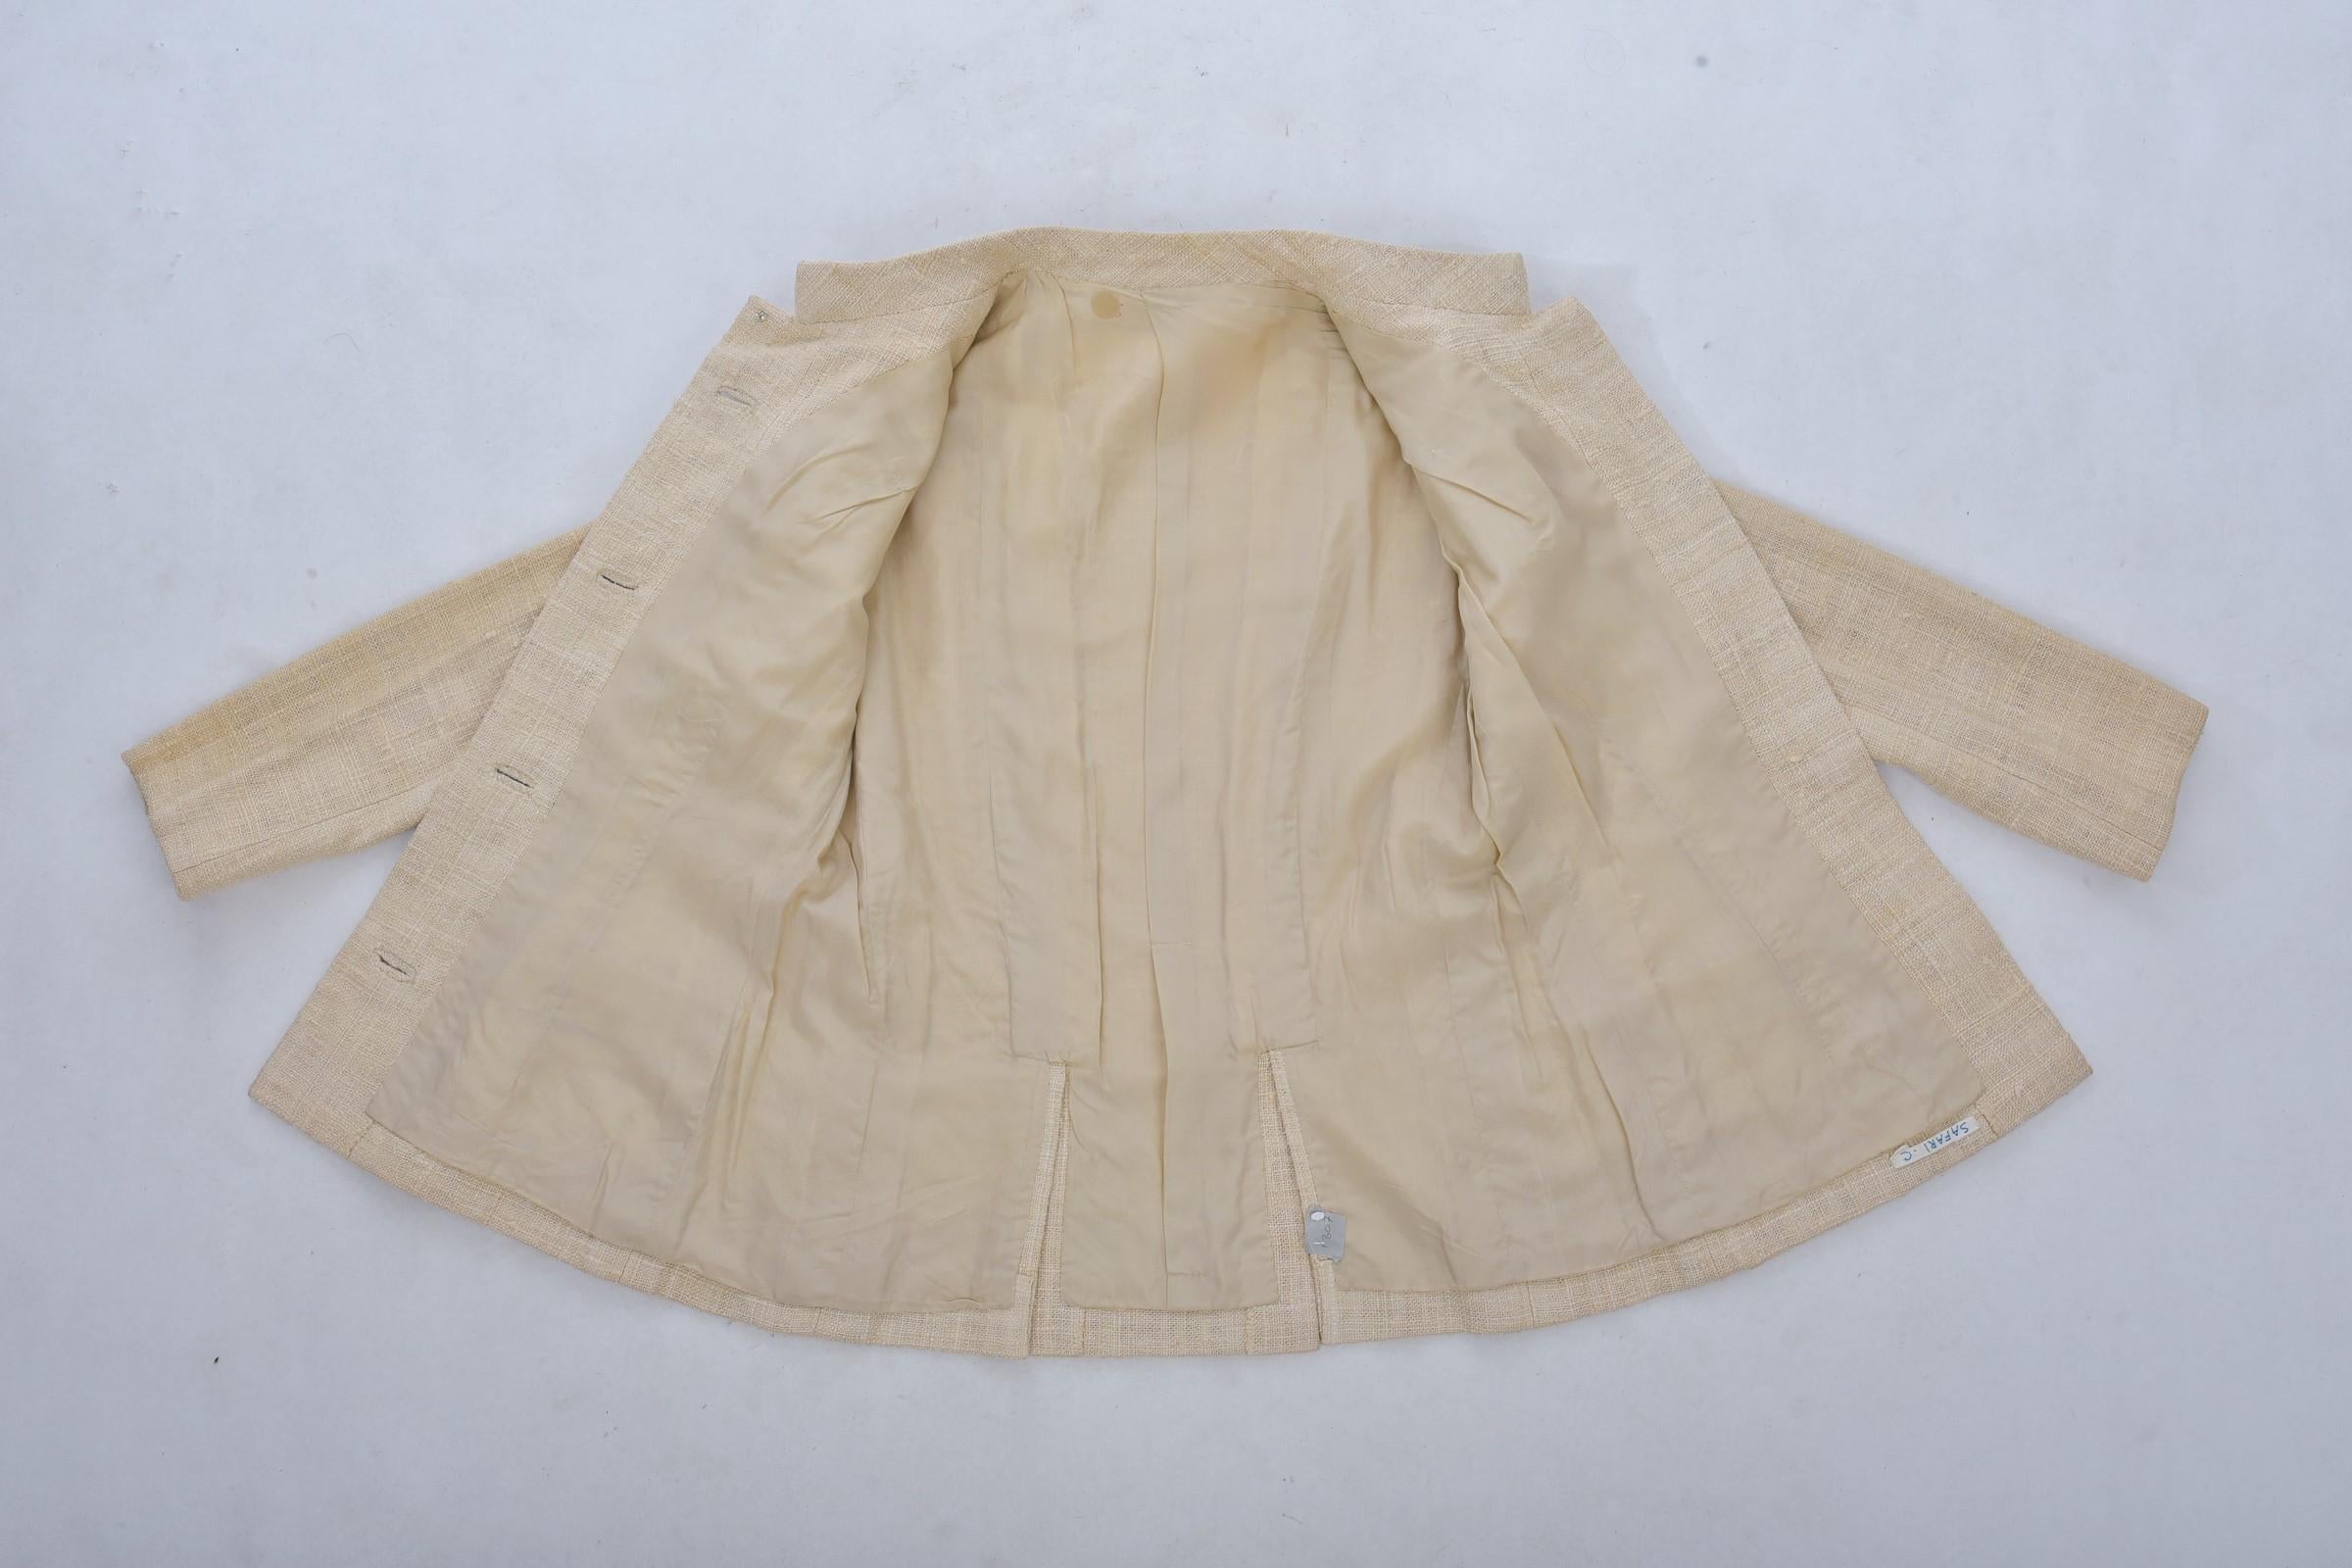  A French Safari Jacket In Beige Linen And Silk Toile Circa 1968-1972 9